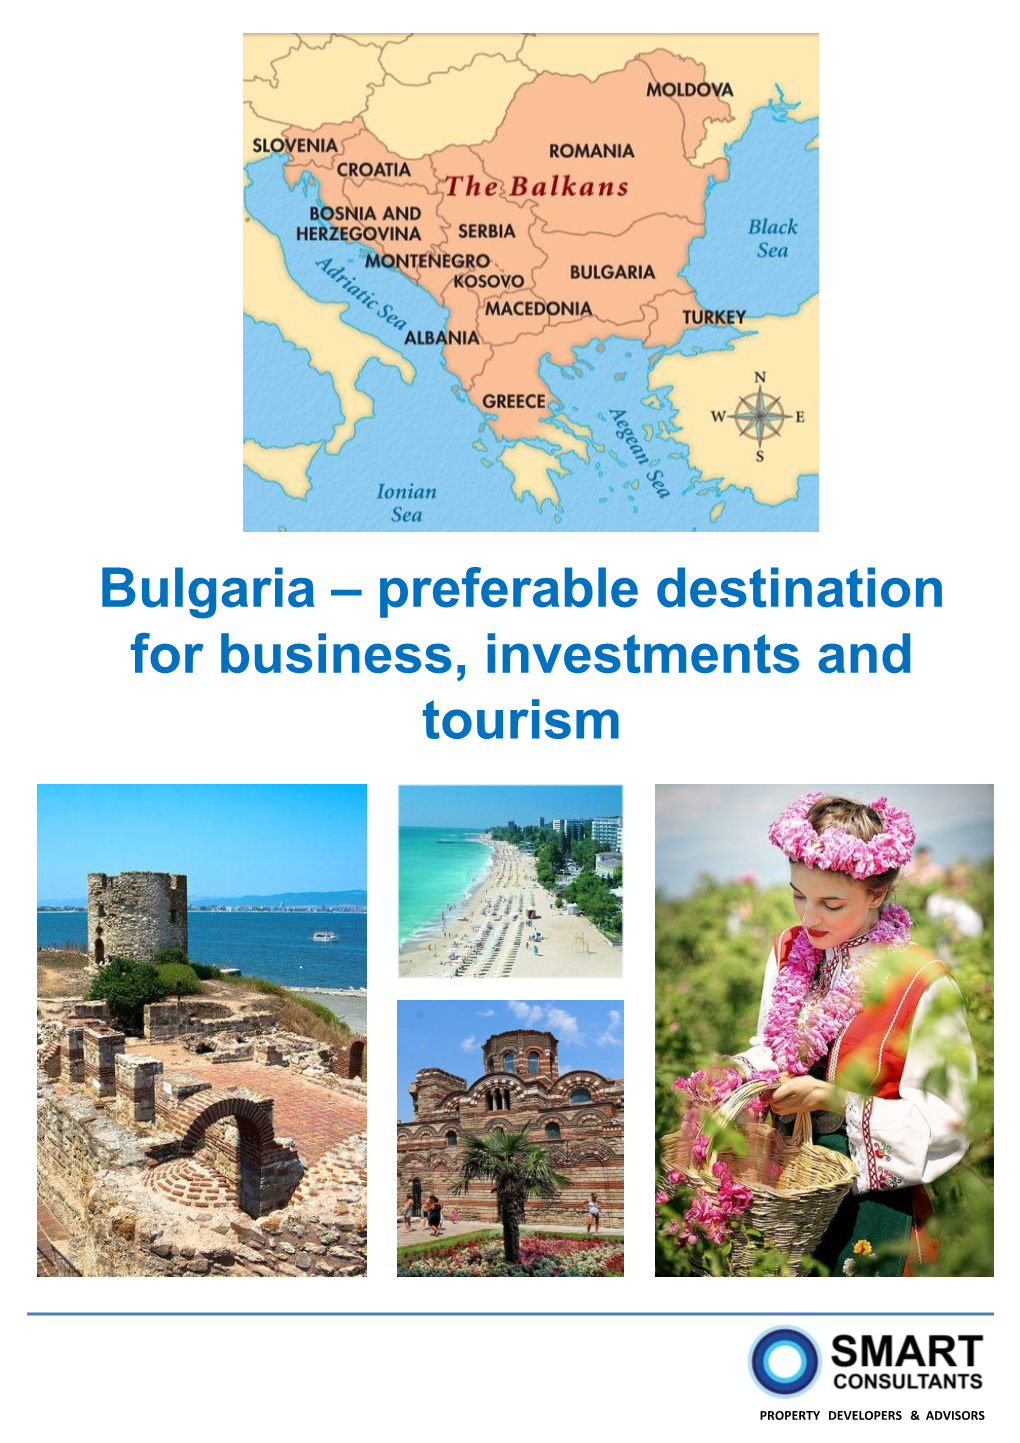 Bulgaria – Preferable Destination for Business, Investments and Tourism